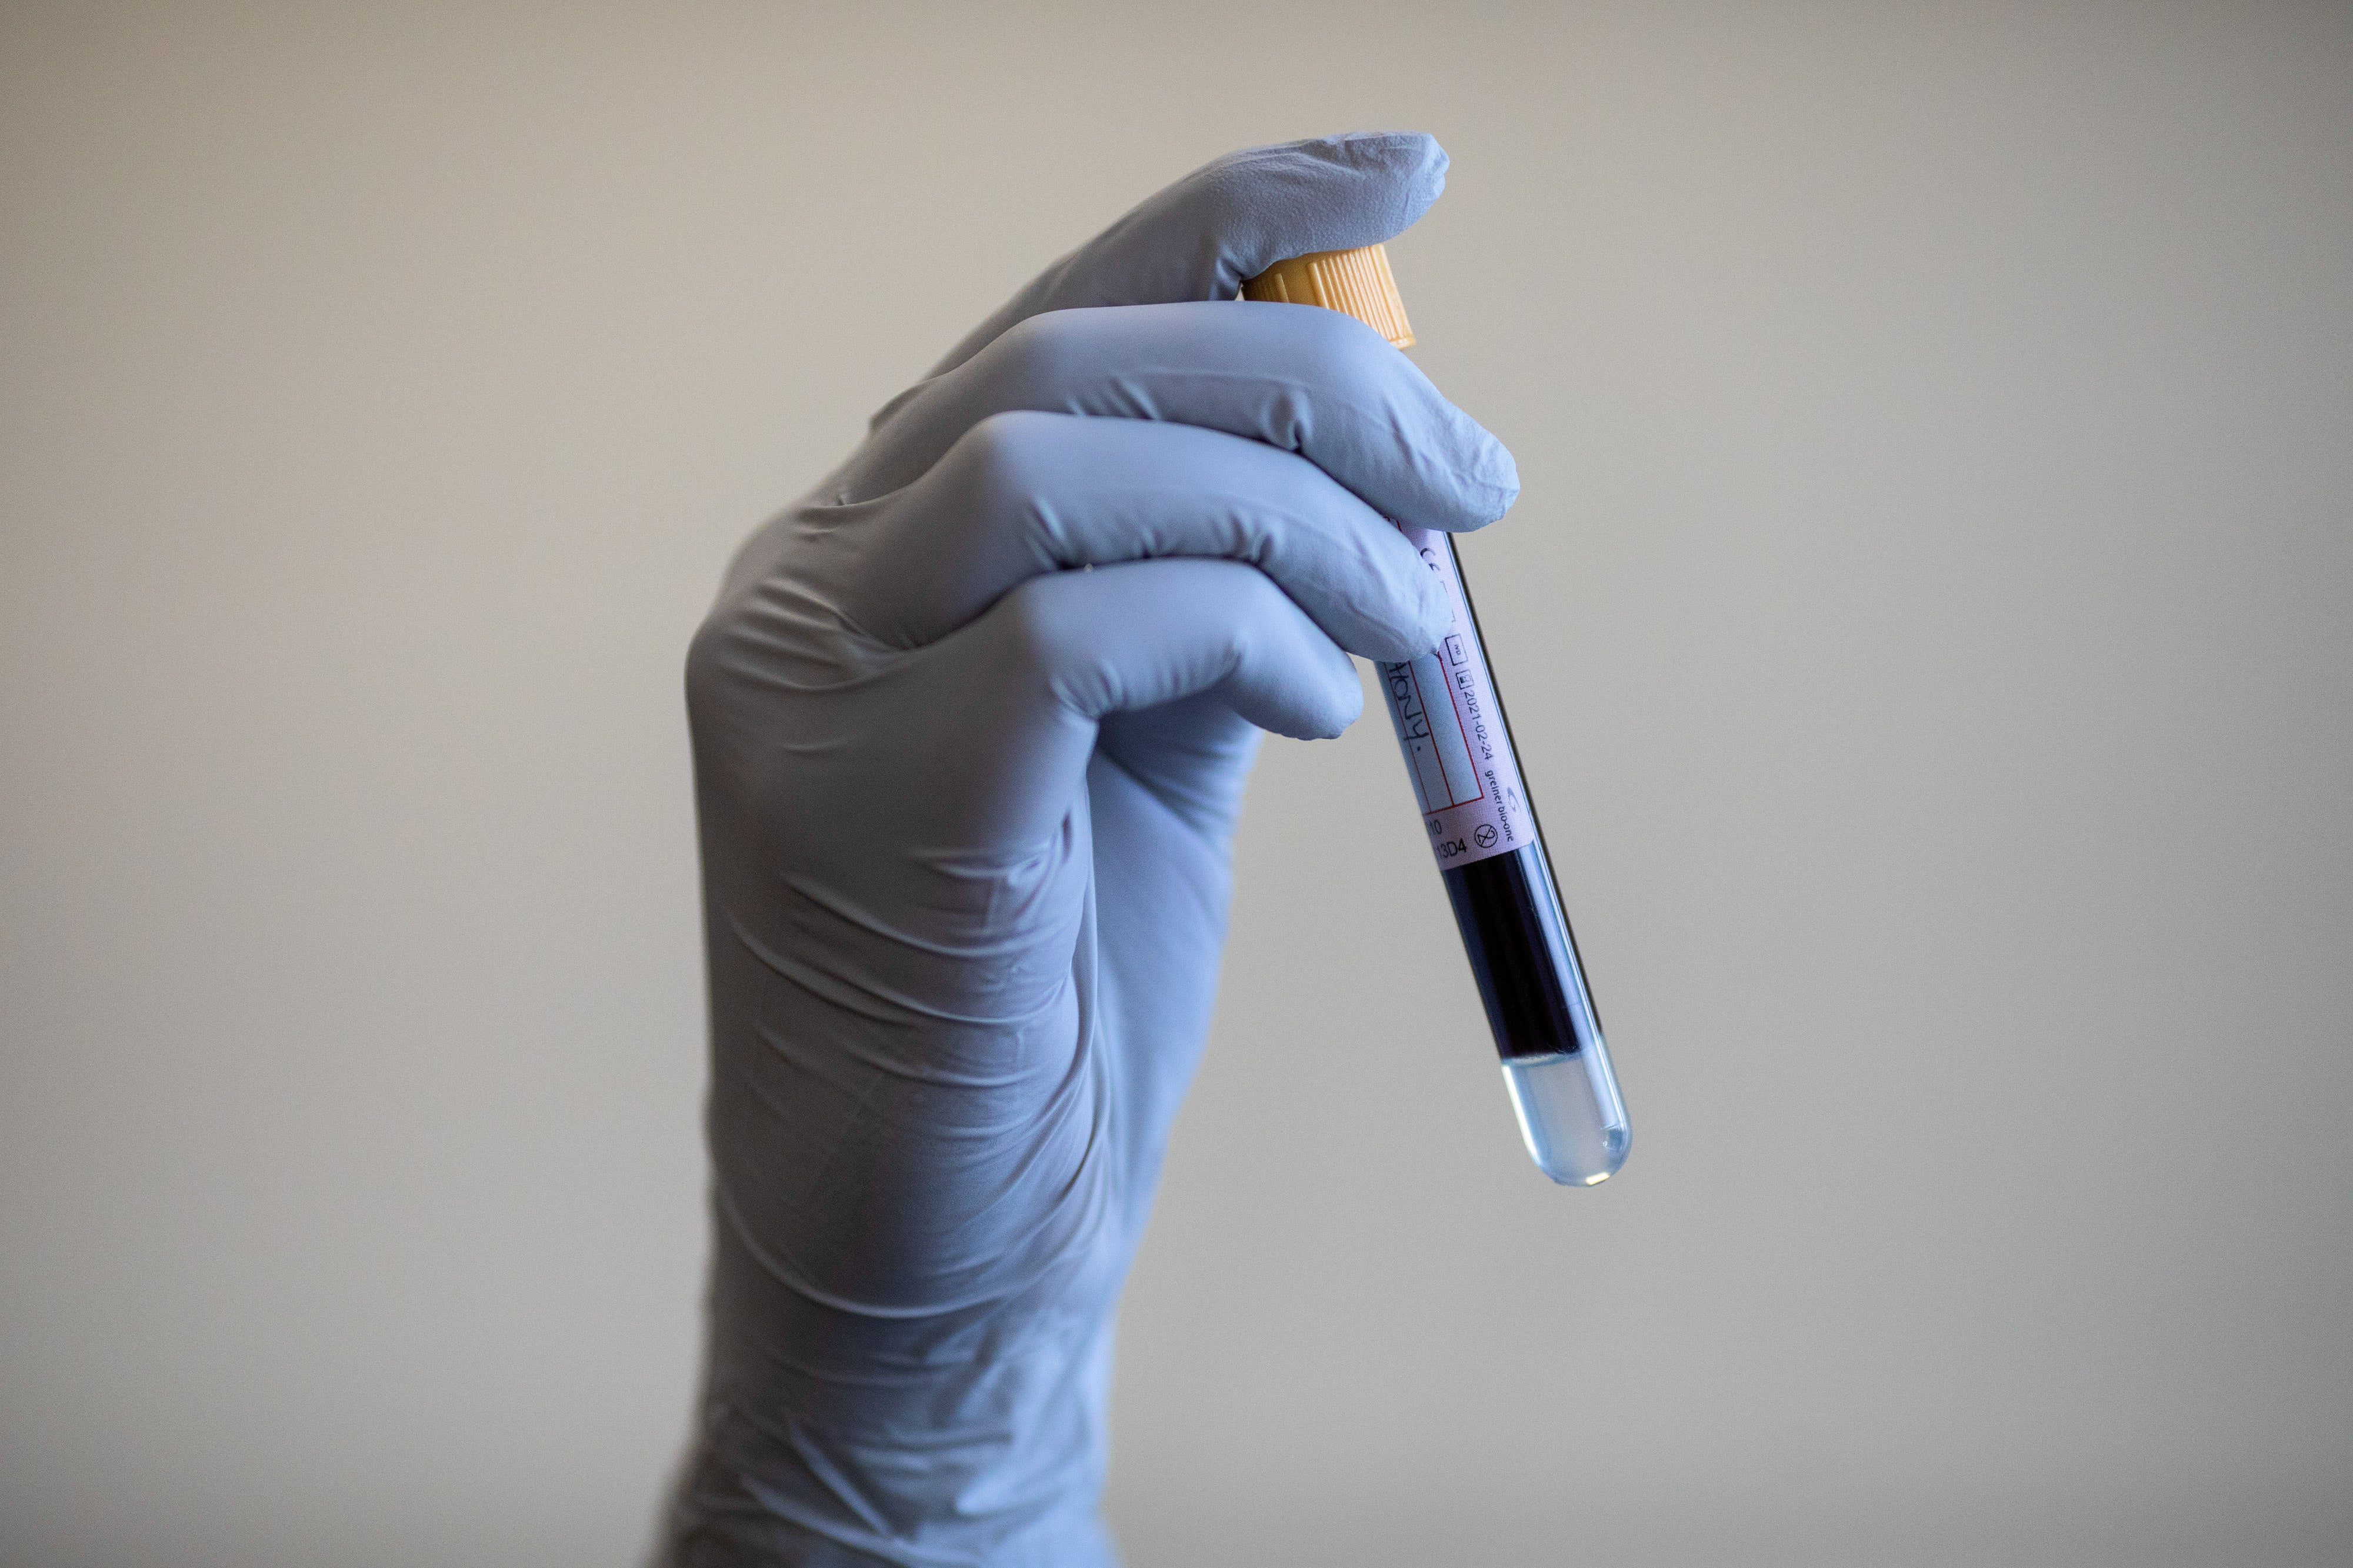 Tens of thousands of blood samples were analysed to find protiens linked to cancer in new research